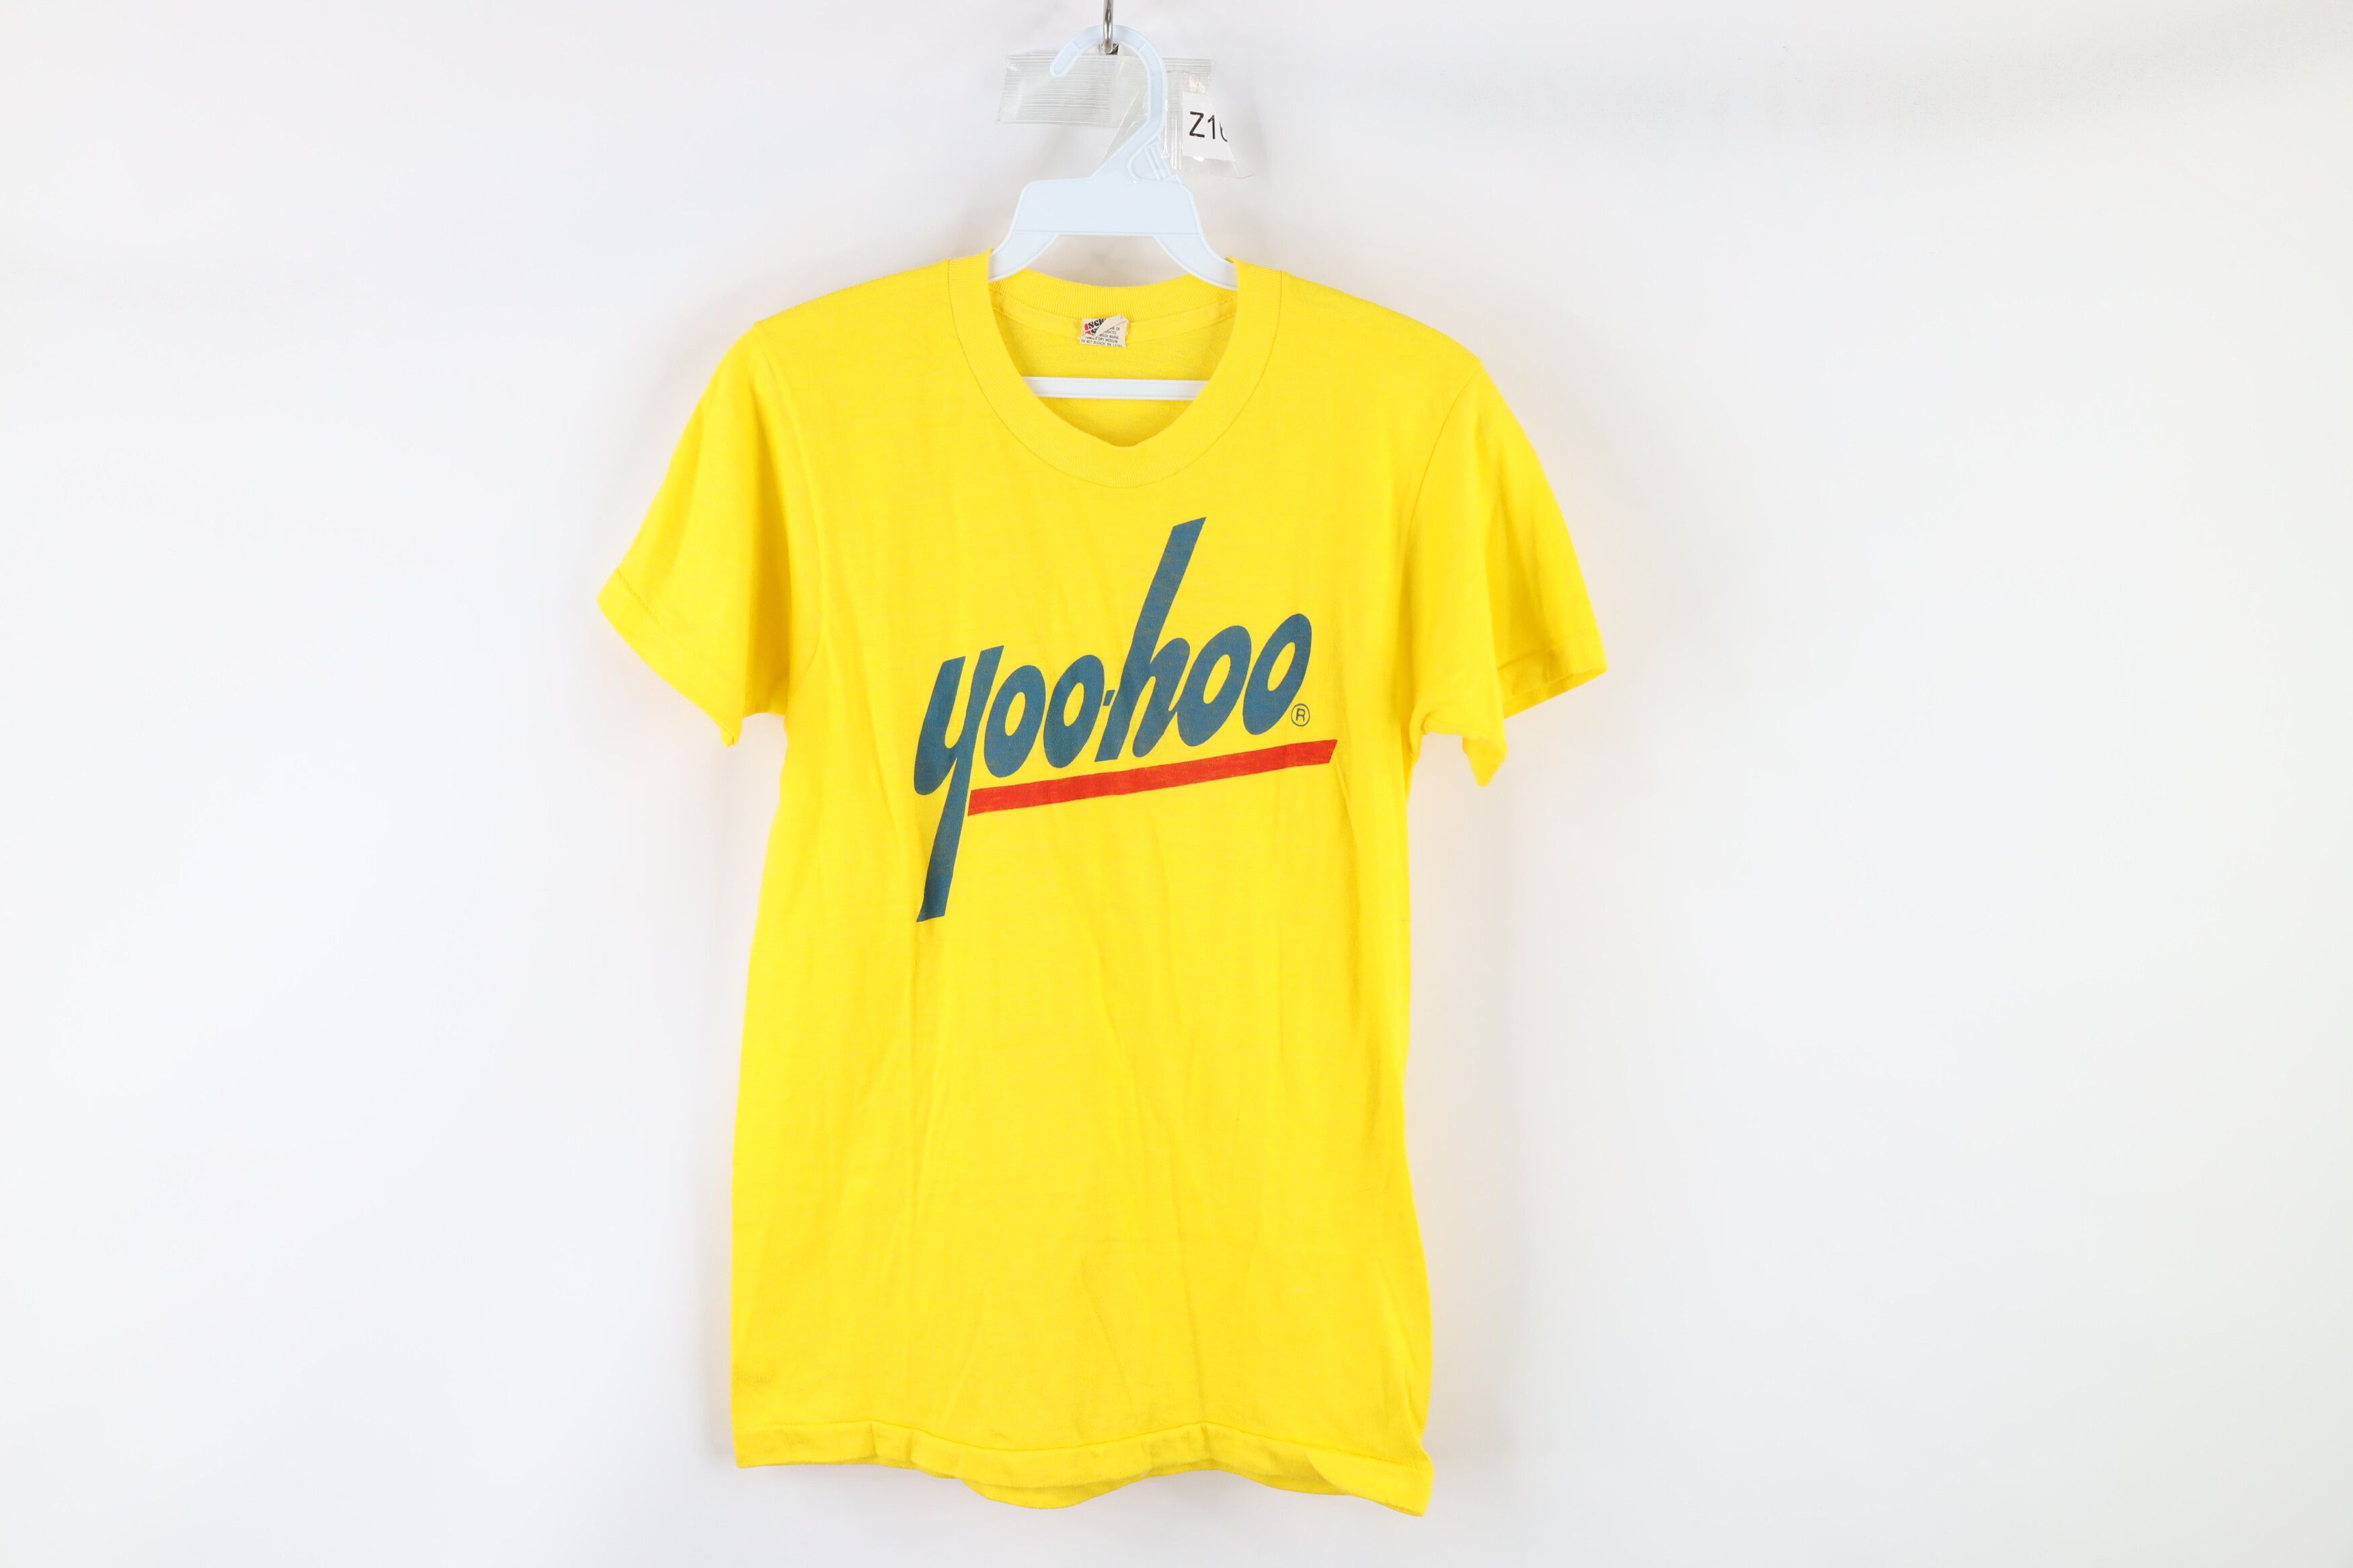 Vintage Vintage 80s YooHoo Chocolate Drink Out T-Shirt Yellow USA Size S / US 4 / IT 40 - 1 Preview